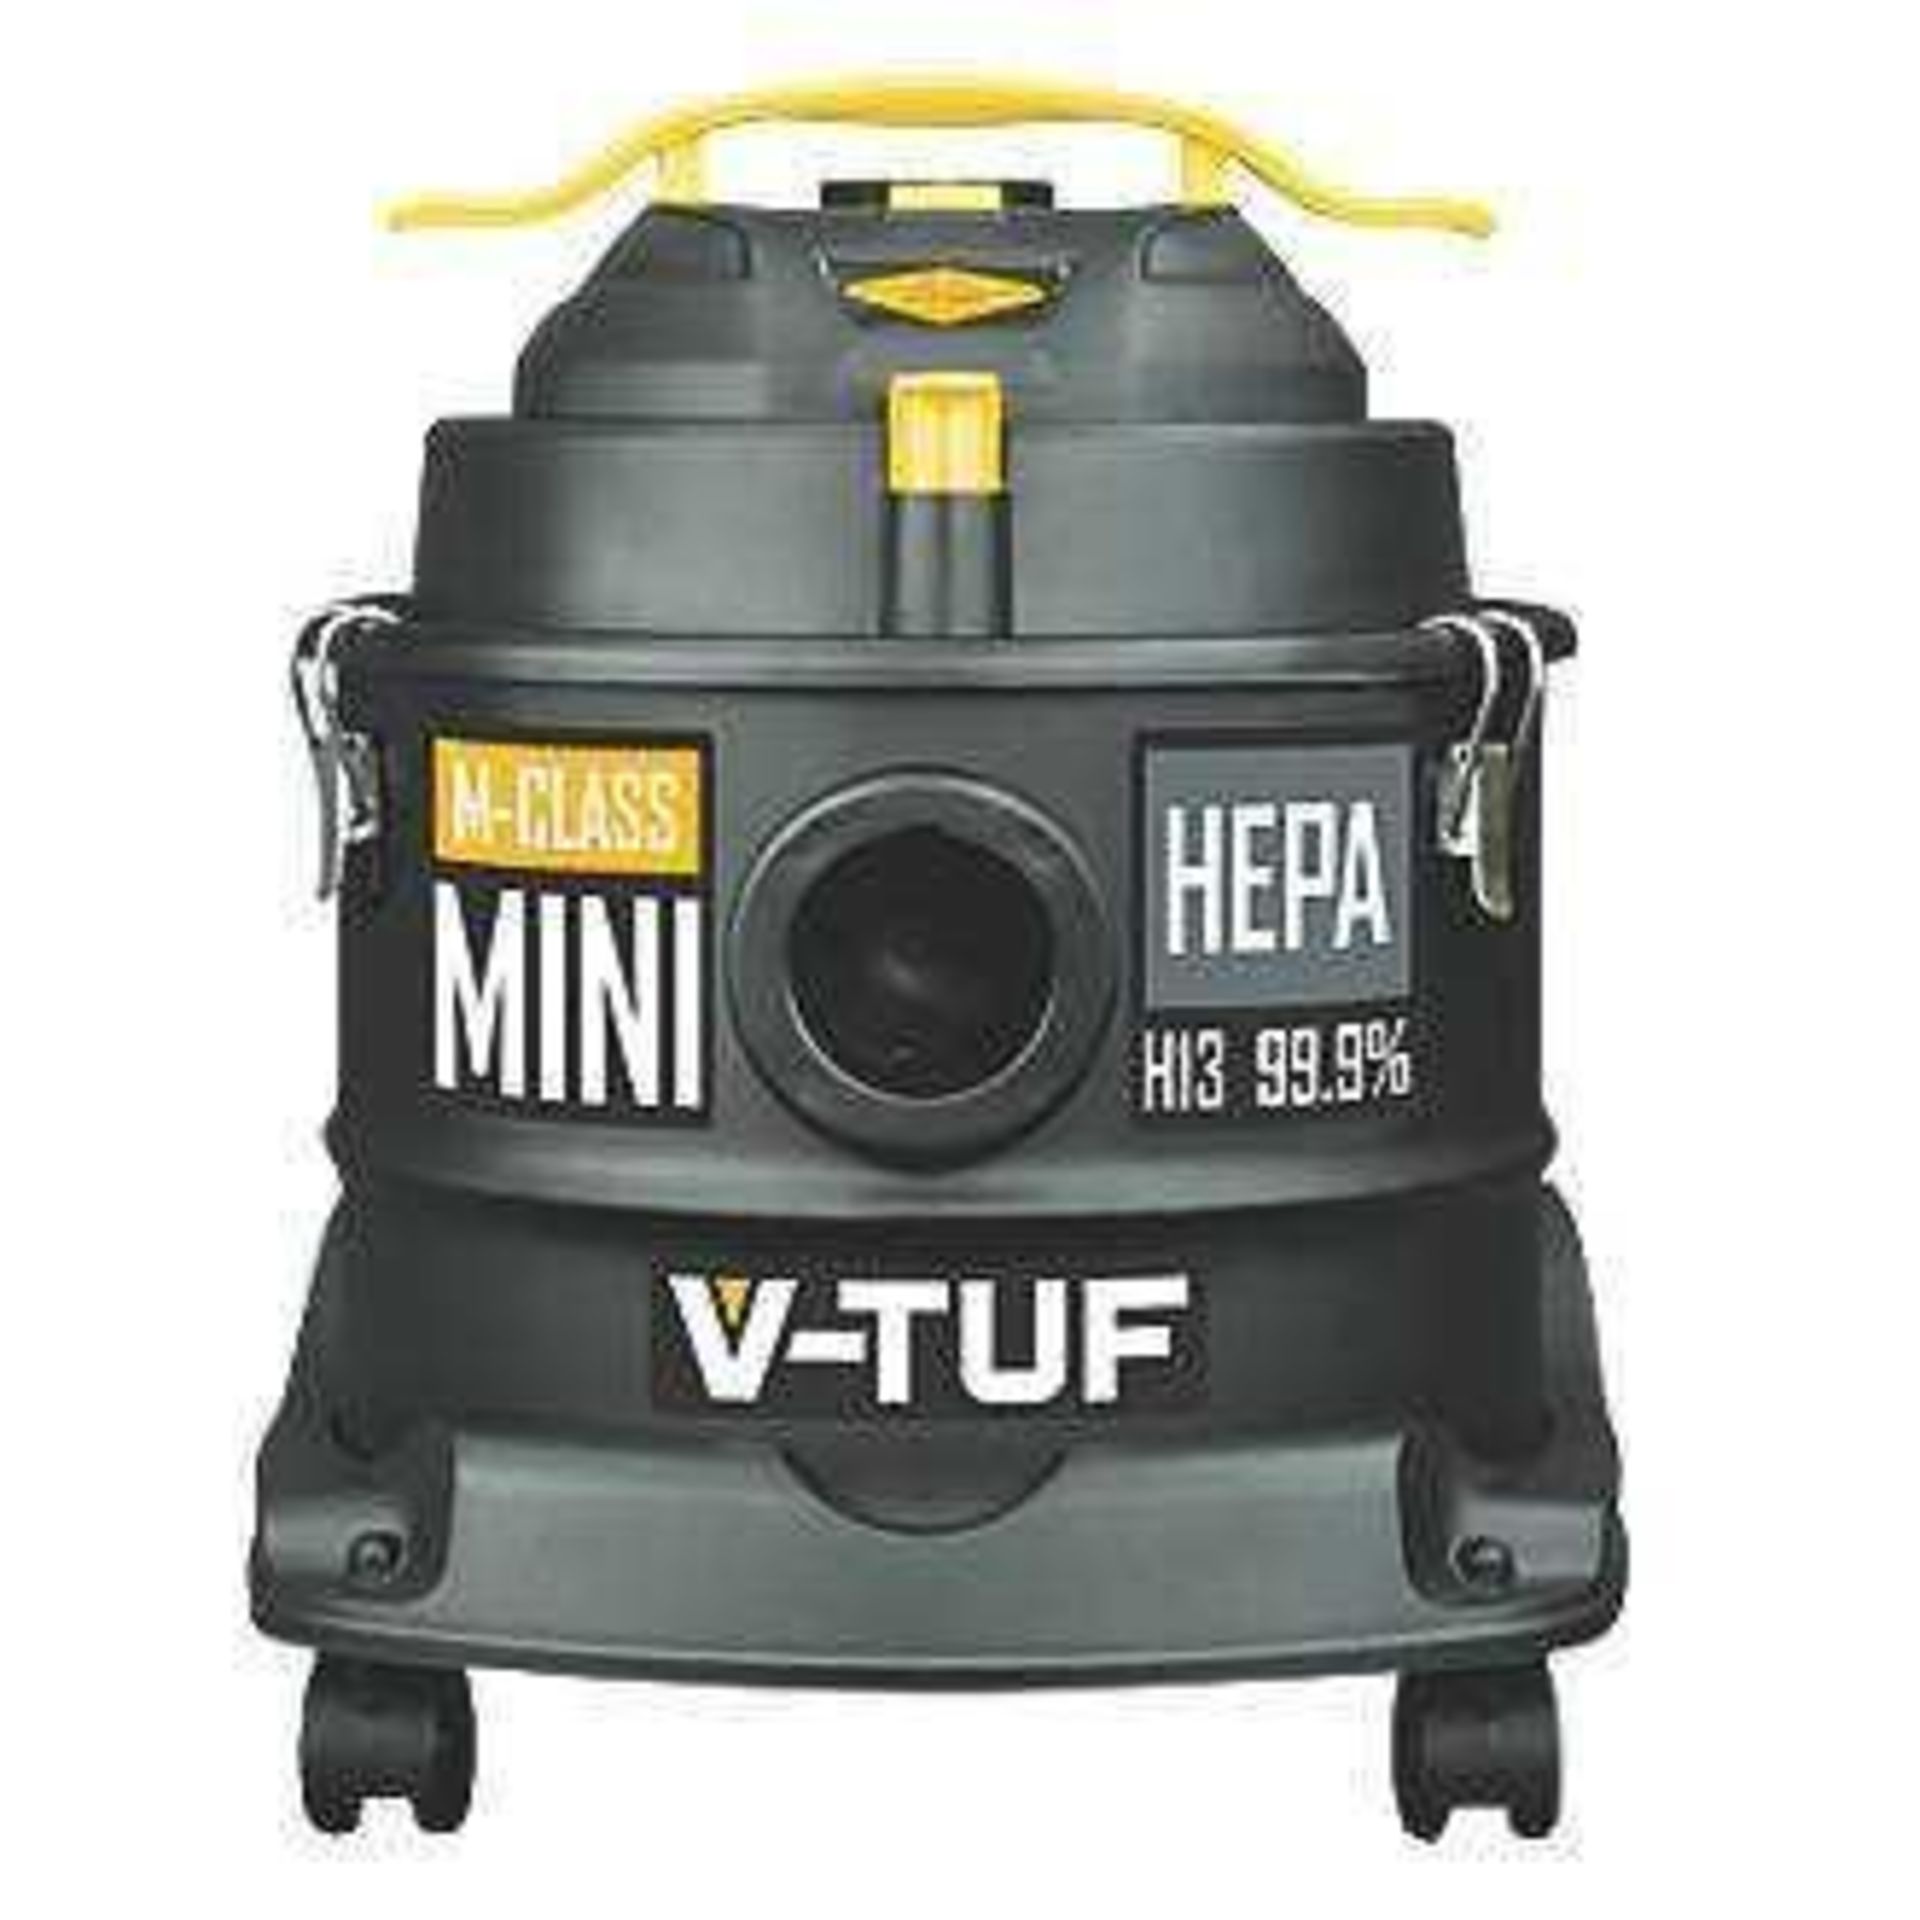 RRP £130 Boxed M-Class Mini V-Tuf Dust Extractor